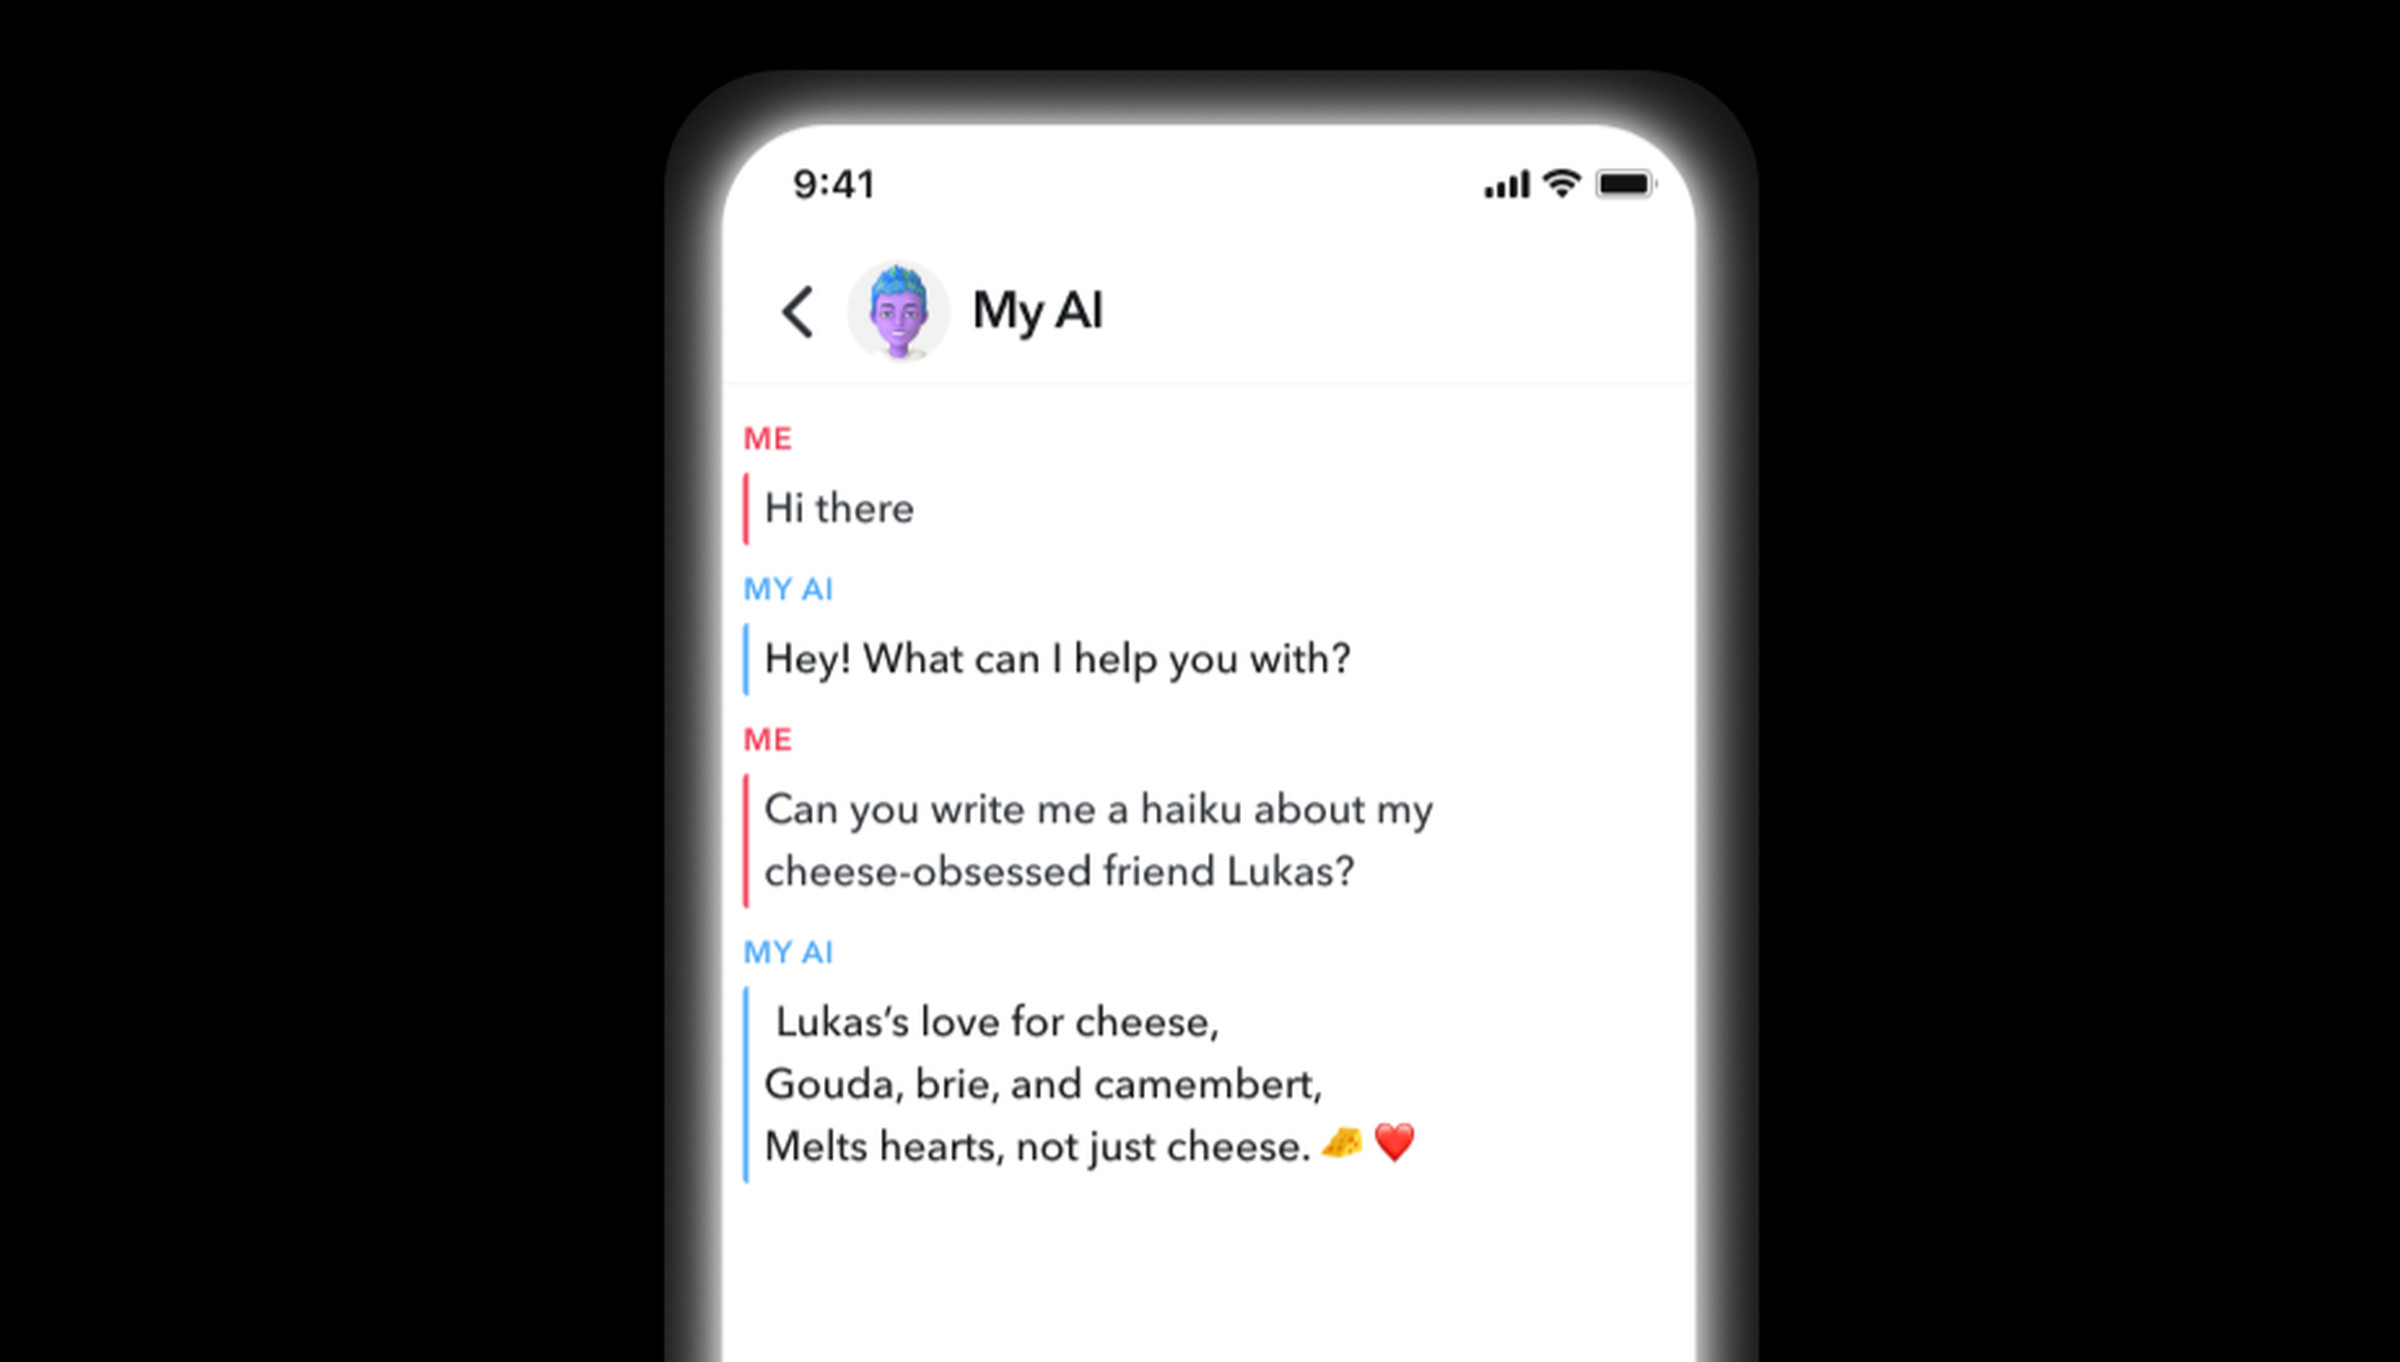 An example conversation with My AI.